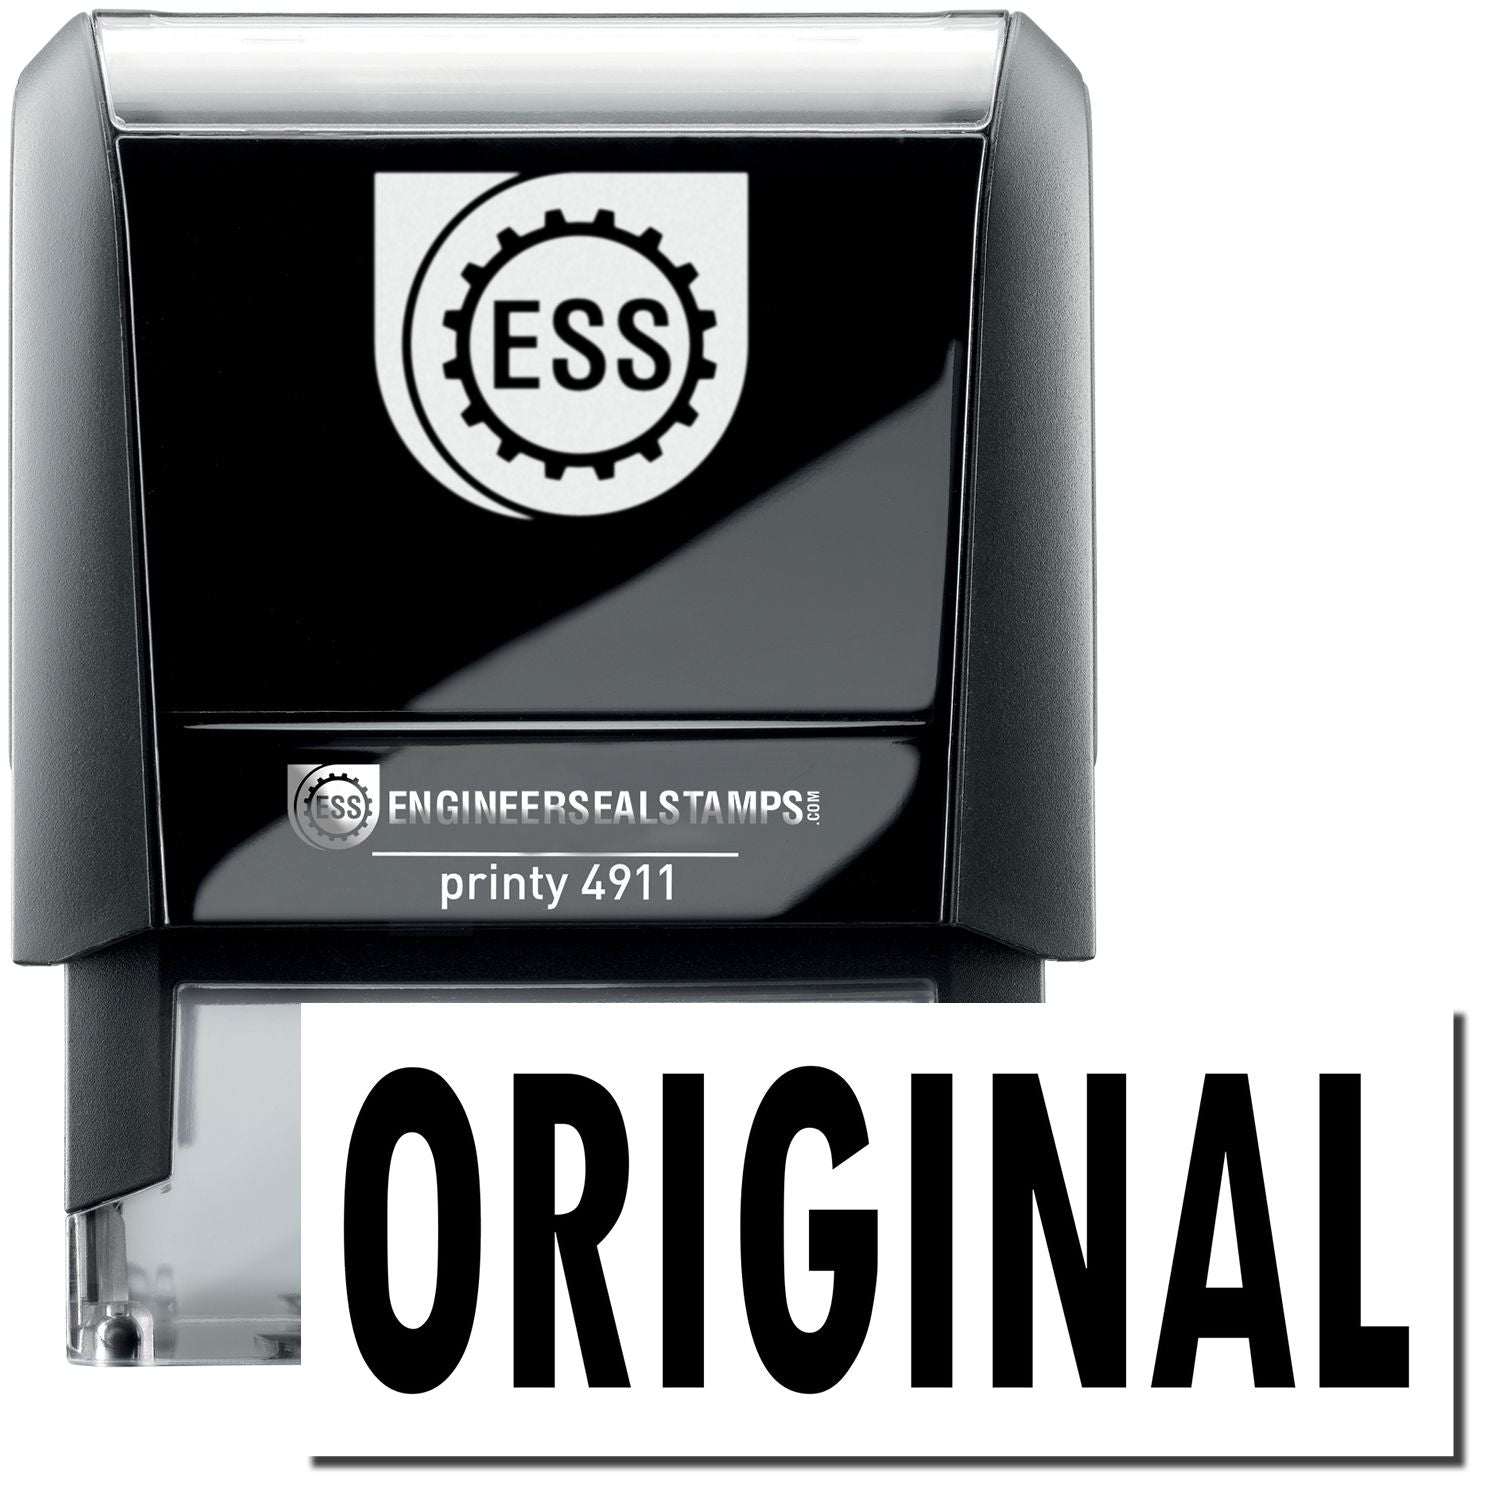 A self-inking stamp with a stamped image showing how the text "ORIGINAL" is displayed after stamping.